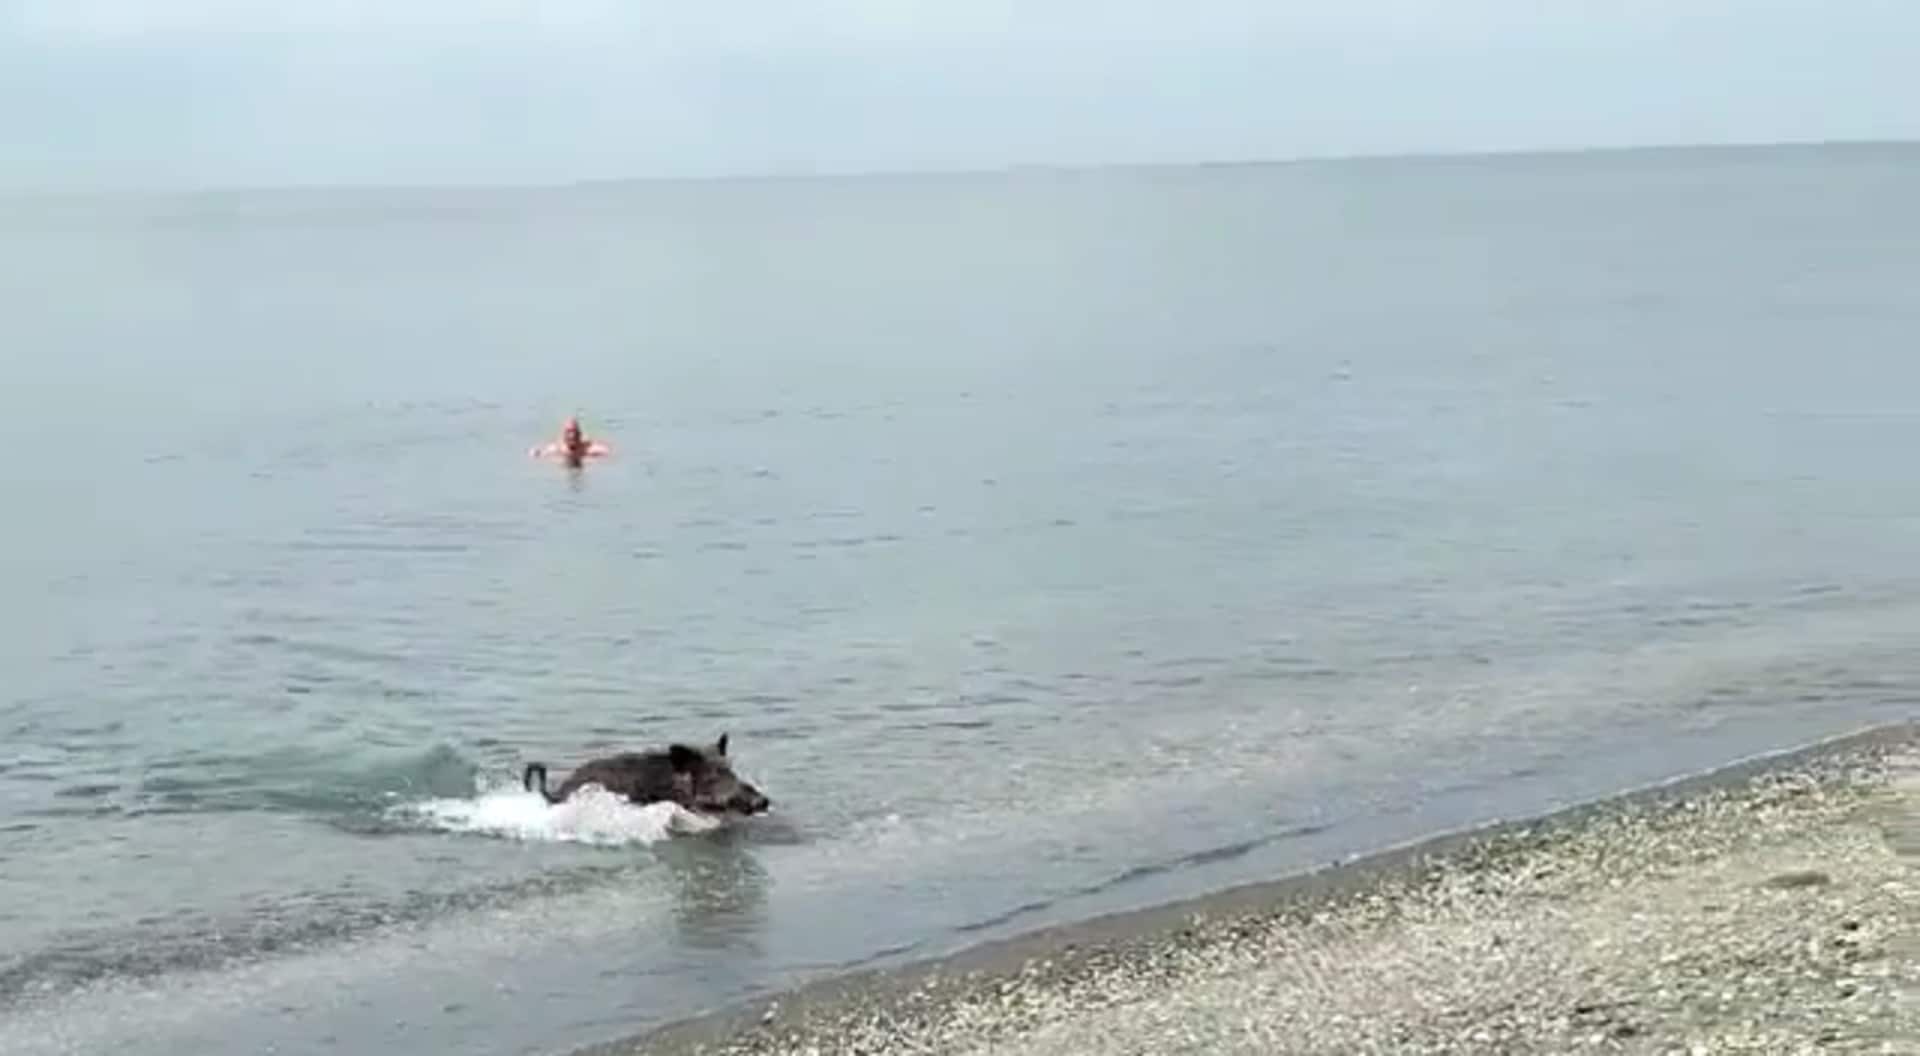 Watch as a wild boar startles bathers and goes for a swim on a Costa del Sol beach